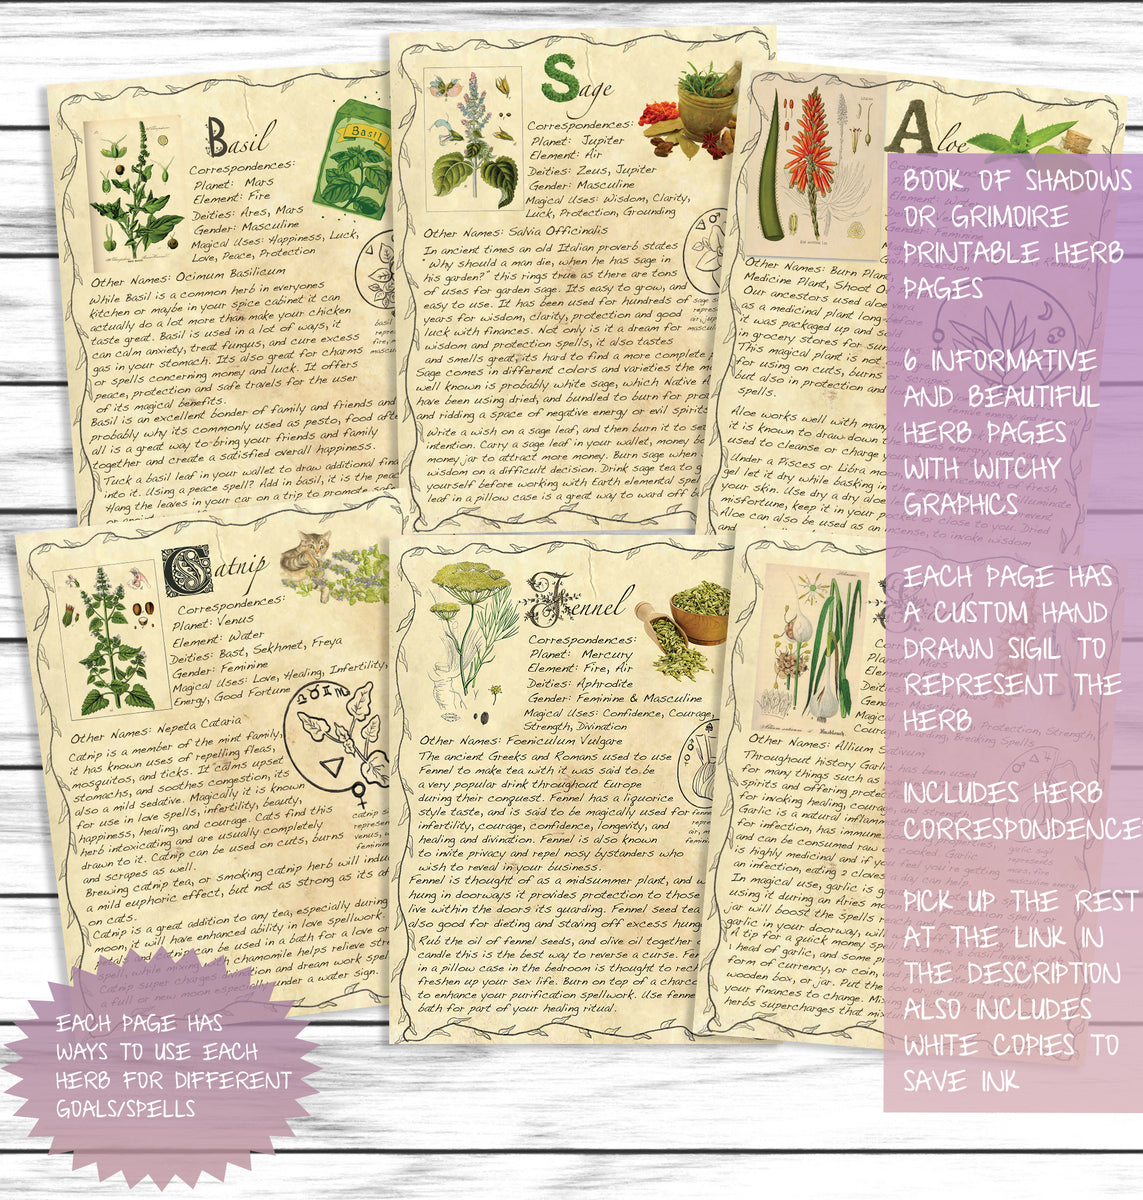 Witchy Aesthetic Herbs Book Of Shadows Witchcraft Grimoire Printable S ...